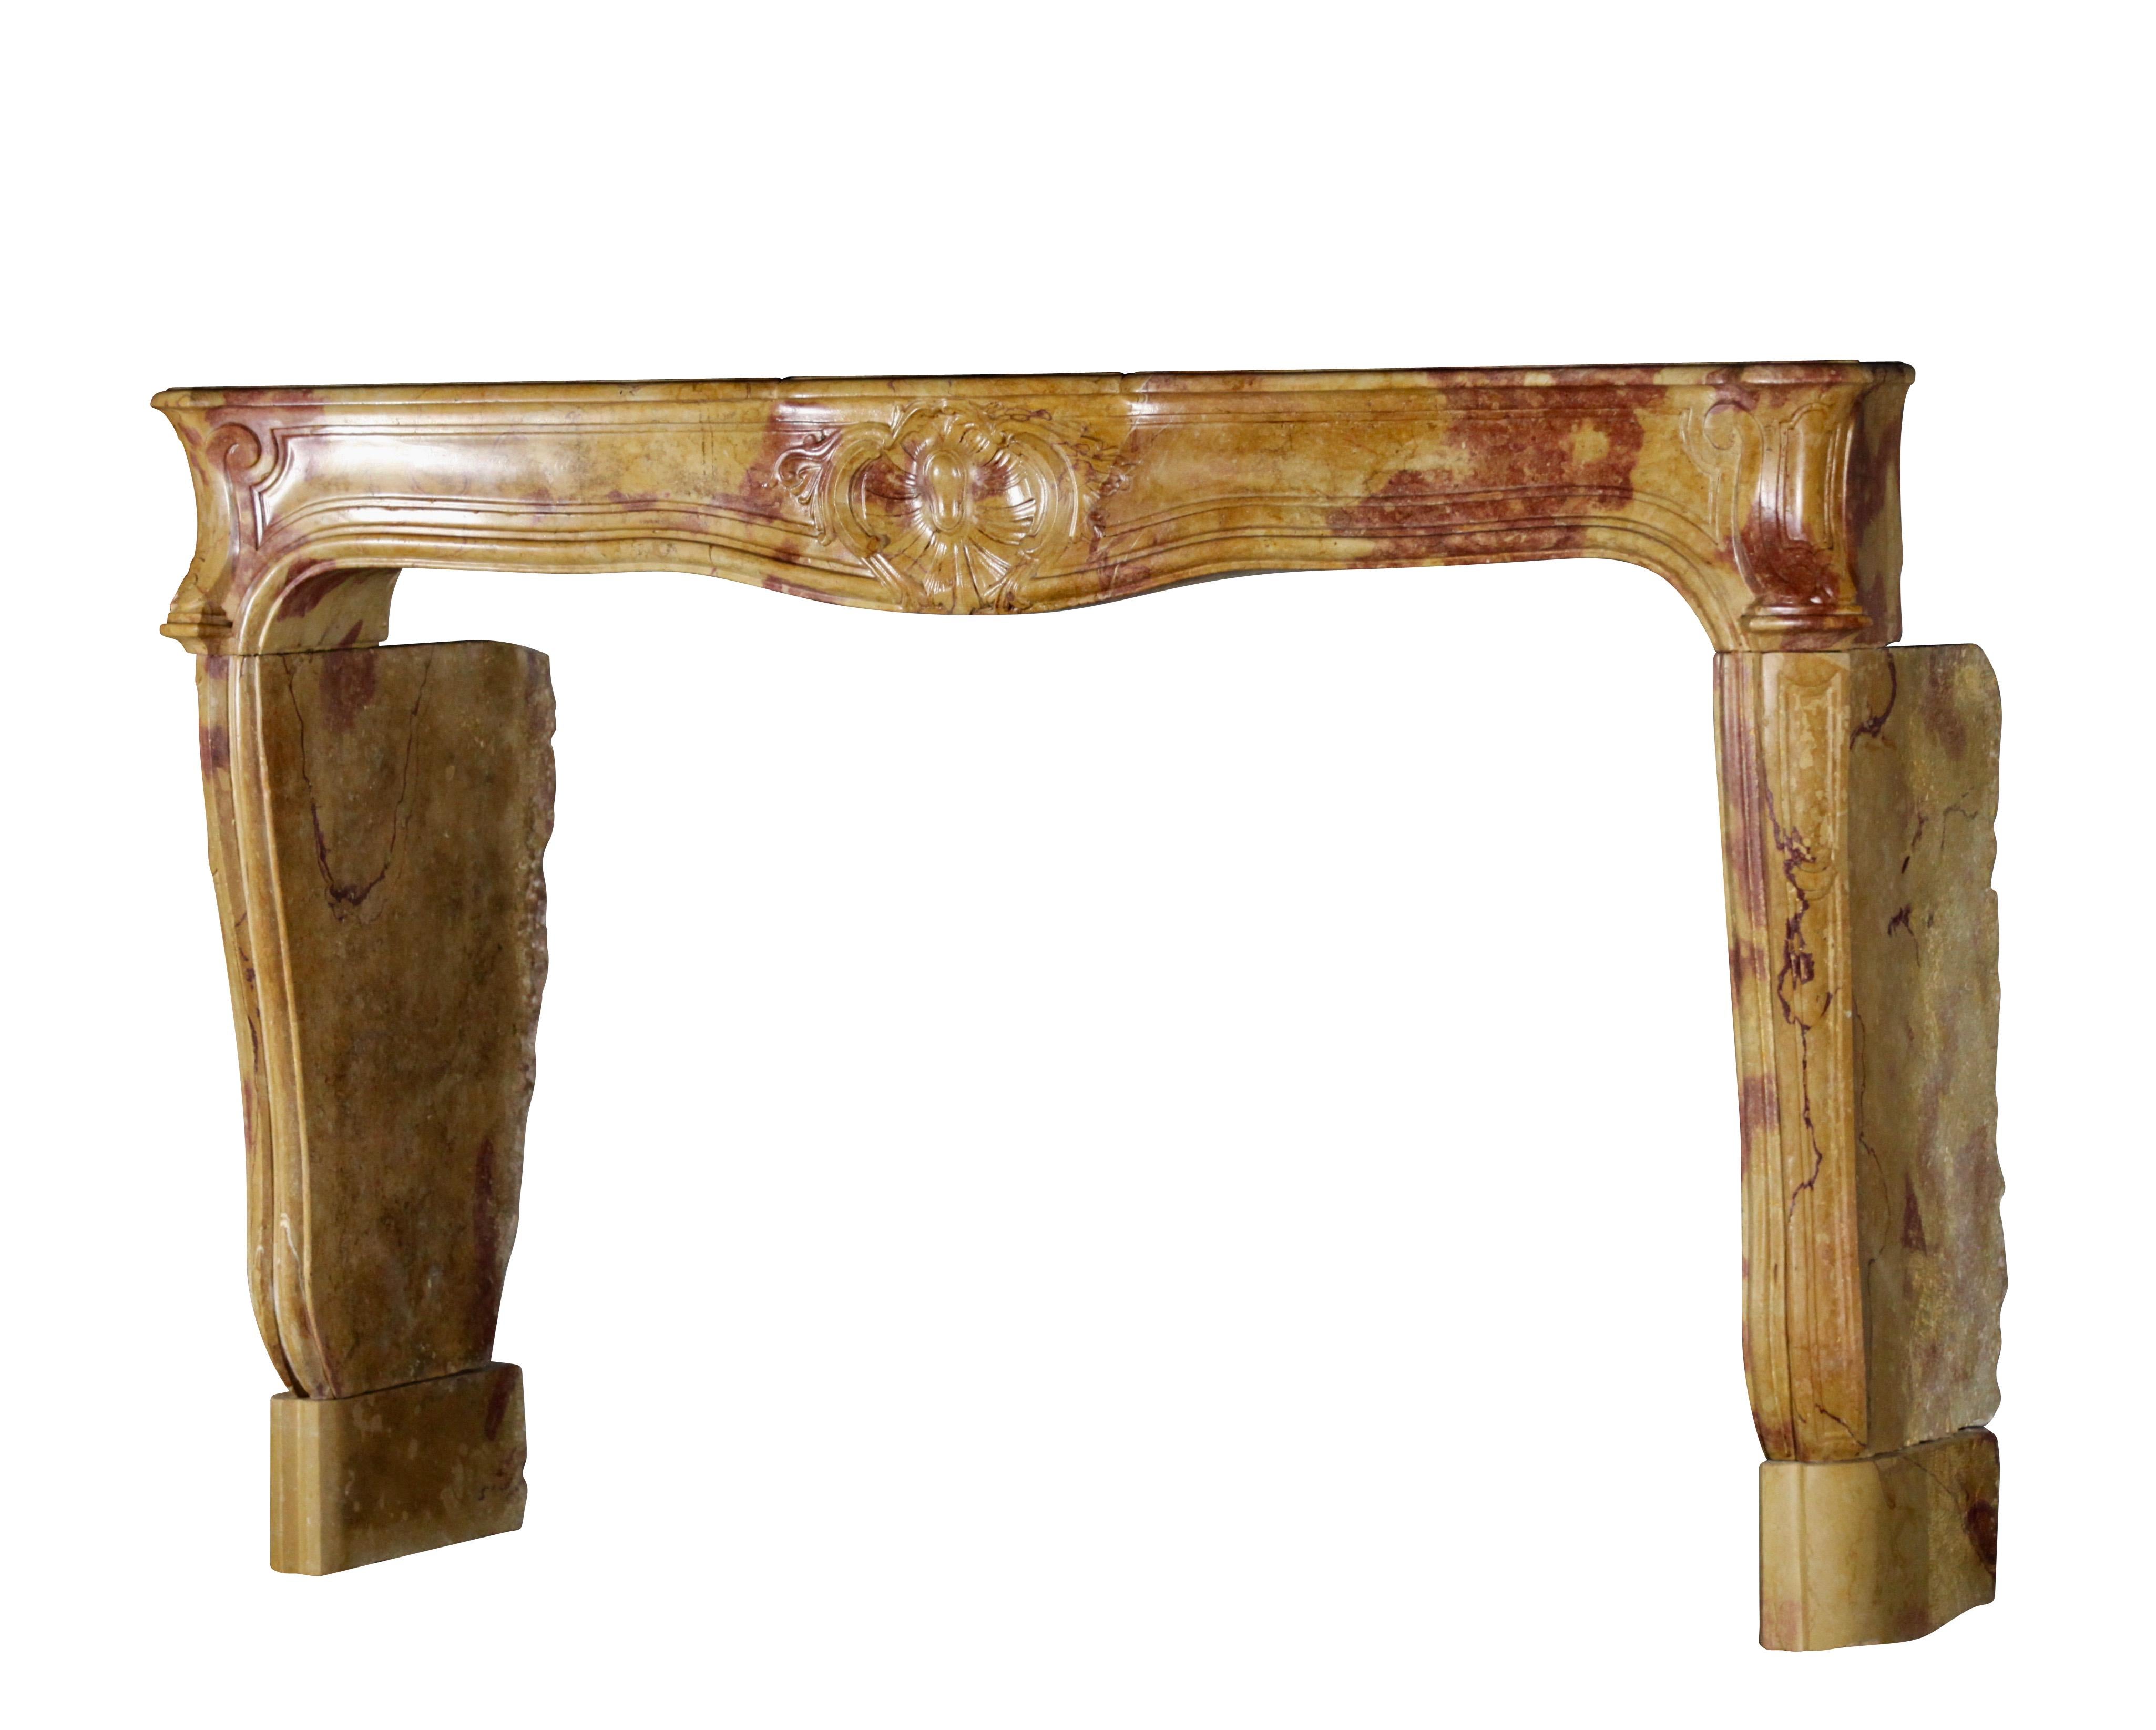 Hand-Carved 18th Century Fine French Bicolor Marble Hard Stone Antique Fireplace Mantle For Sale